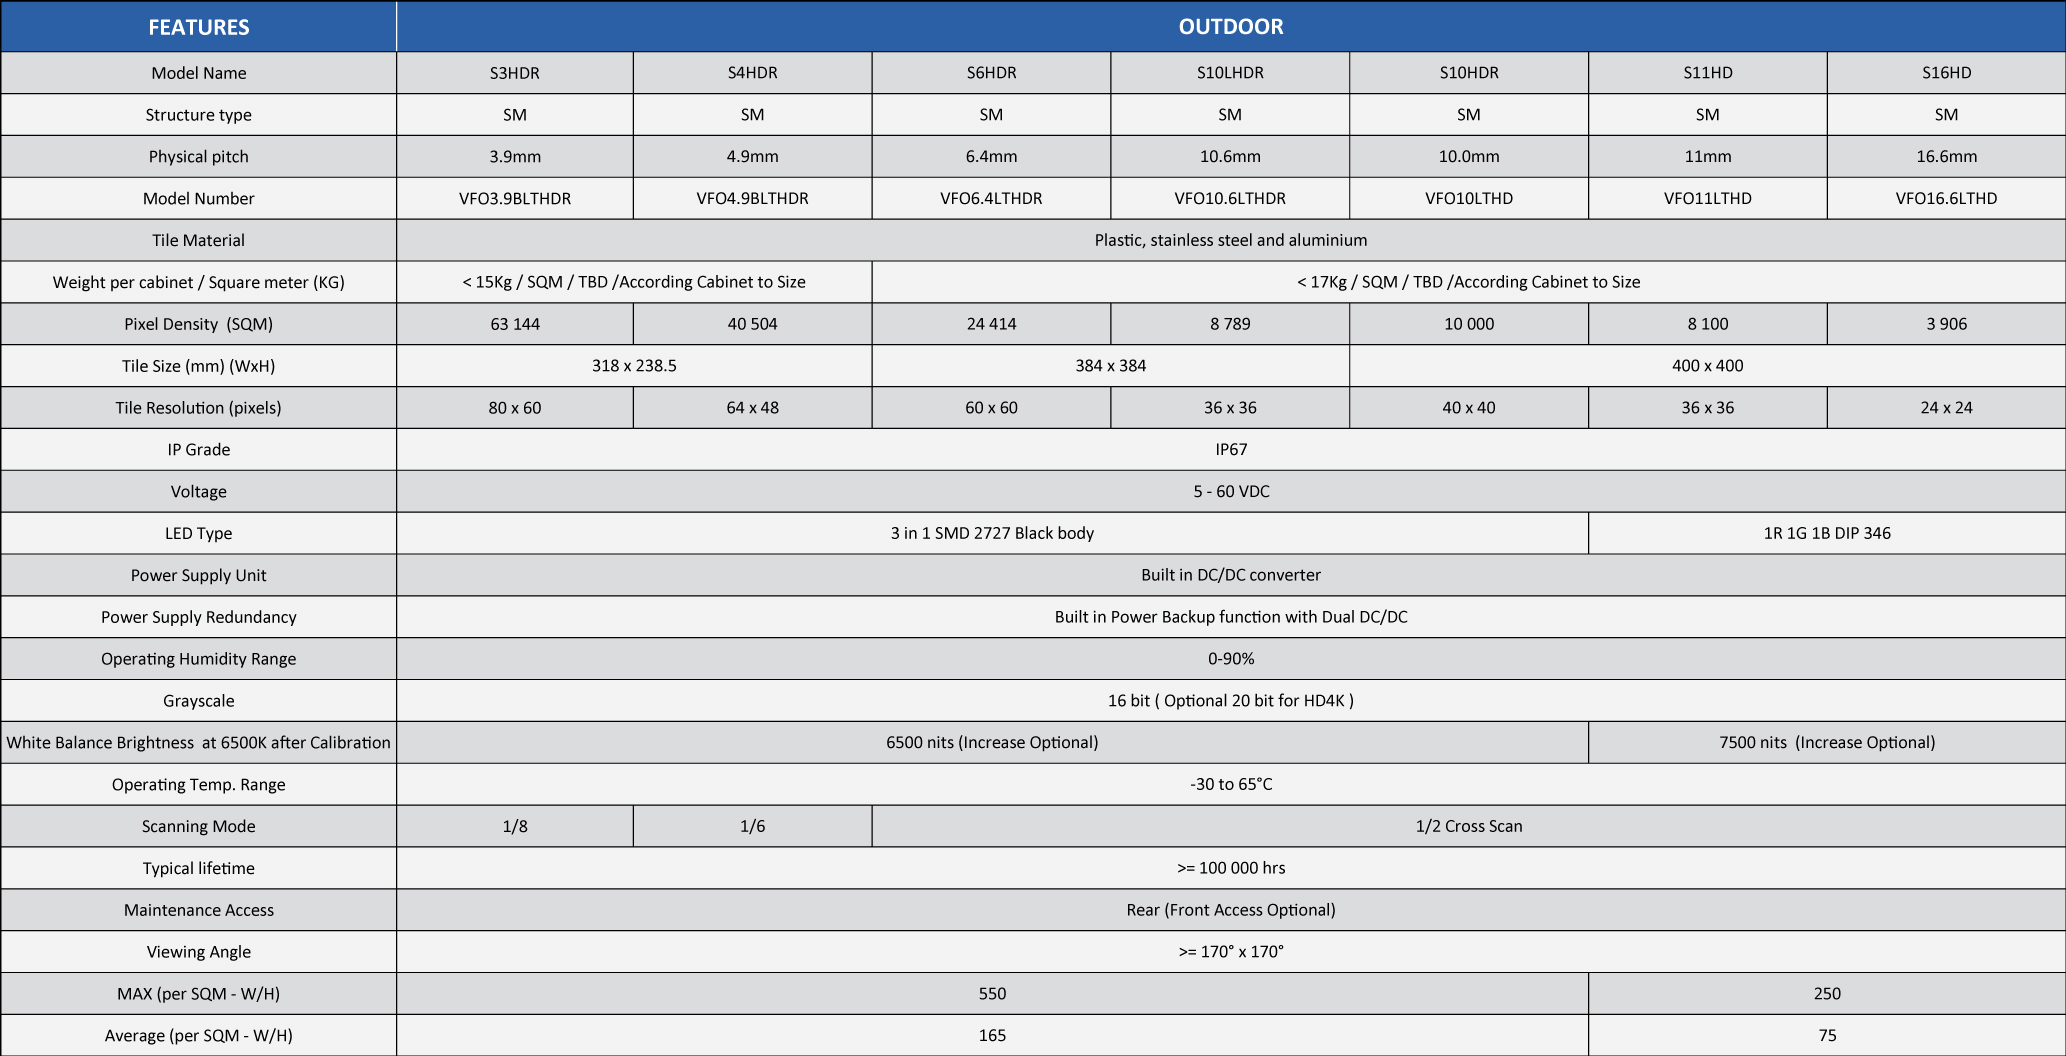 sx outdoor series specifications